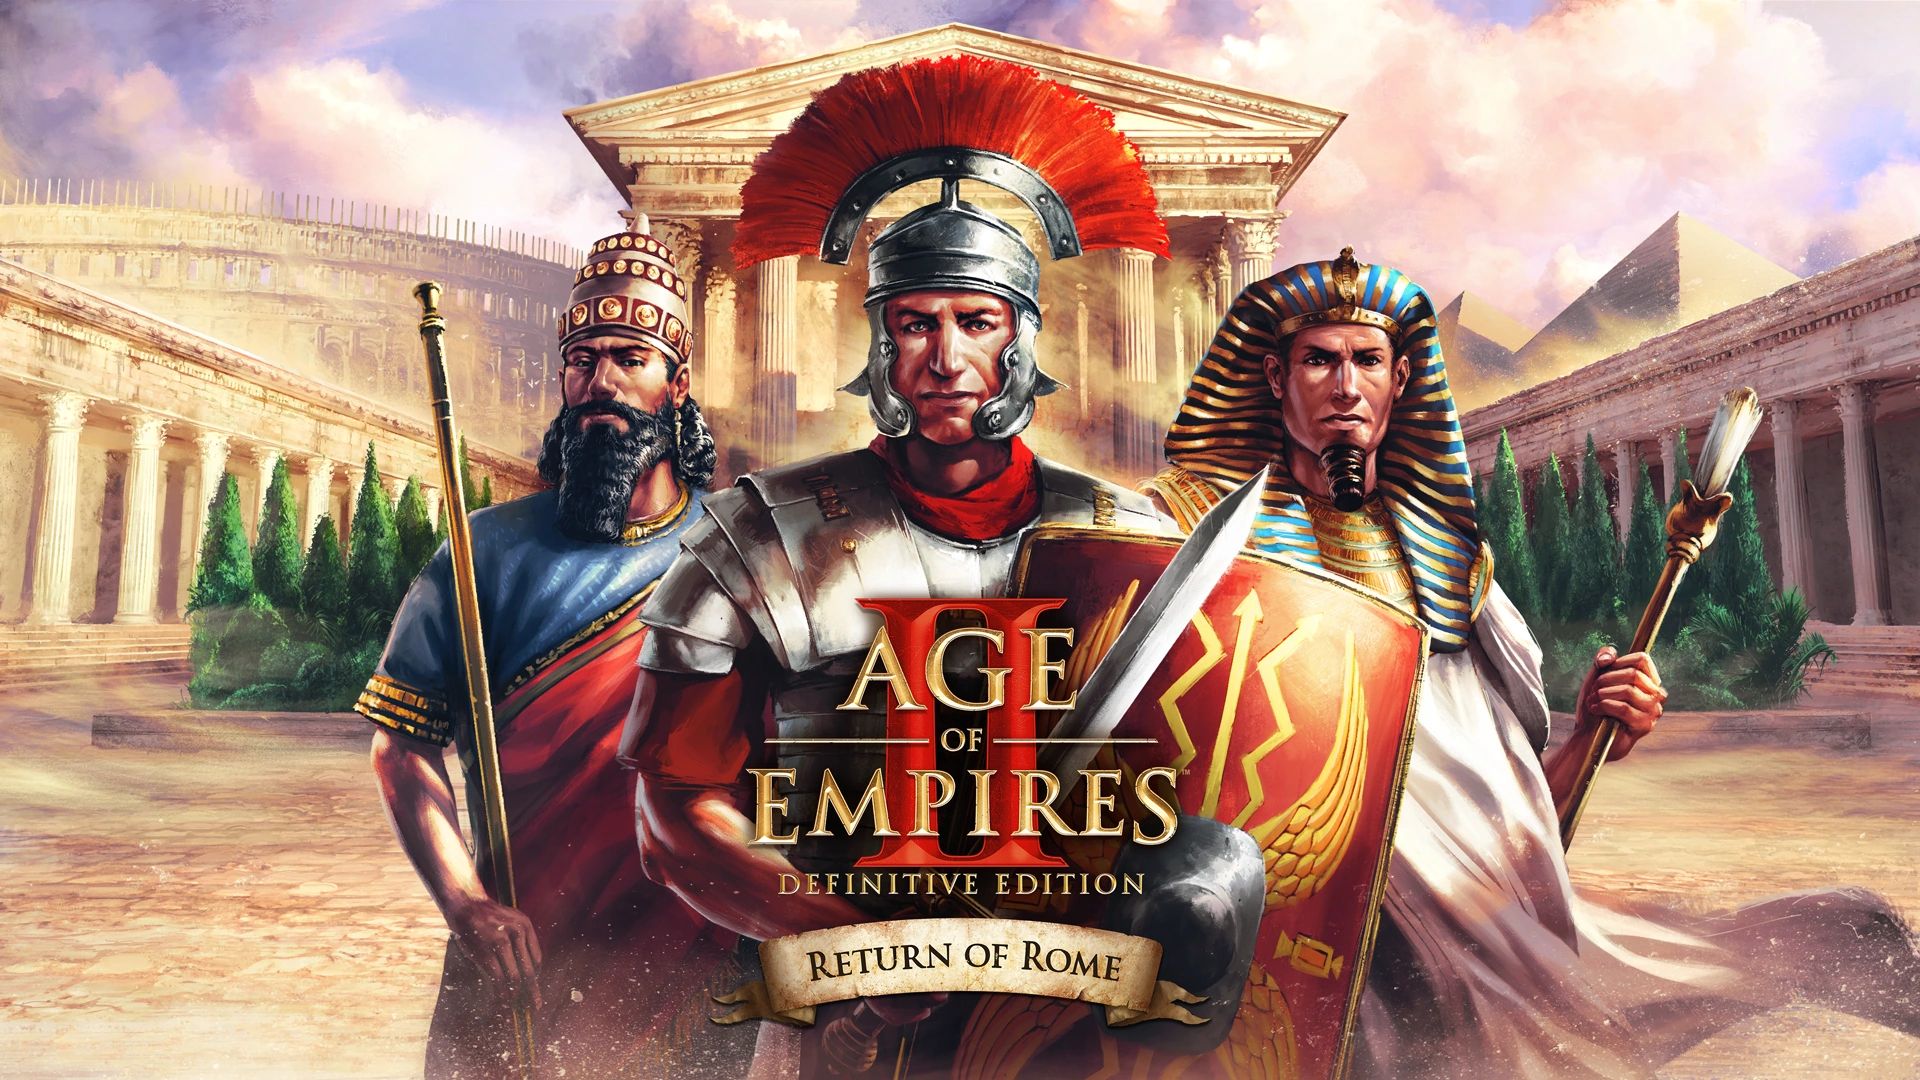 Video: Age of Empires II: Definitive Edition Return of Rome trailer